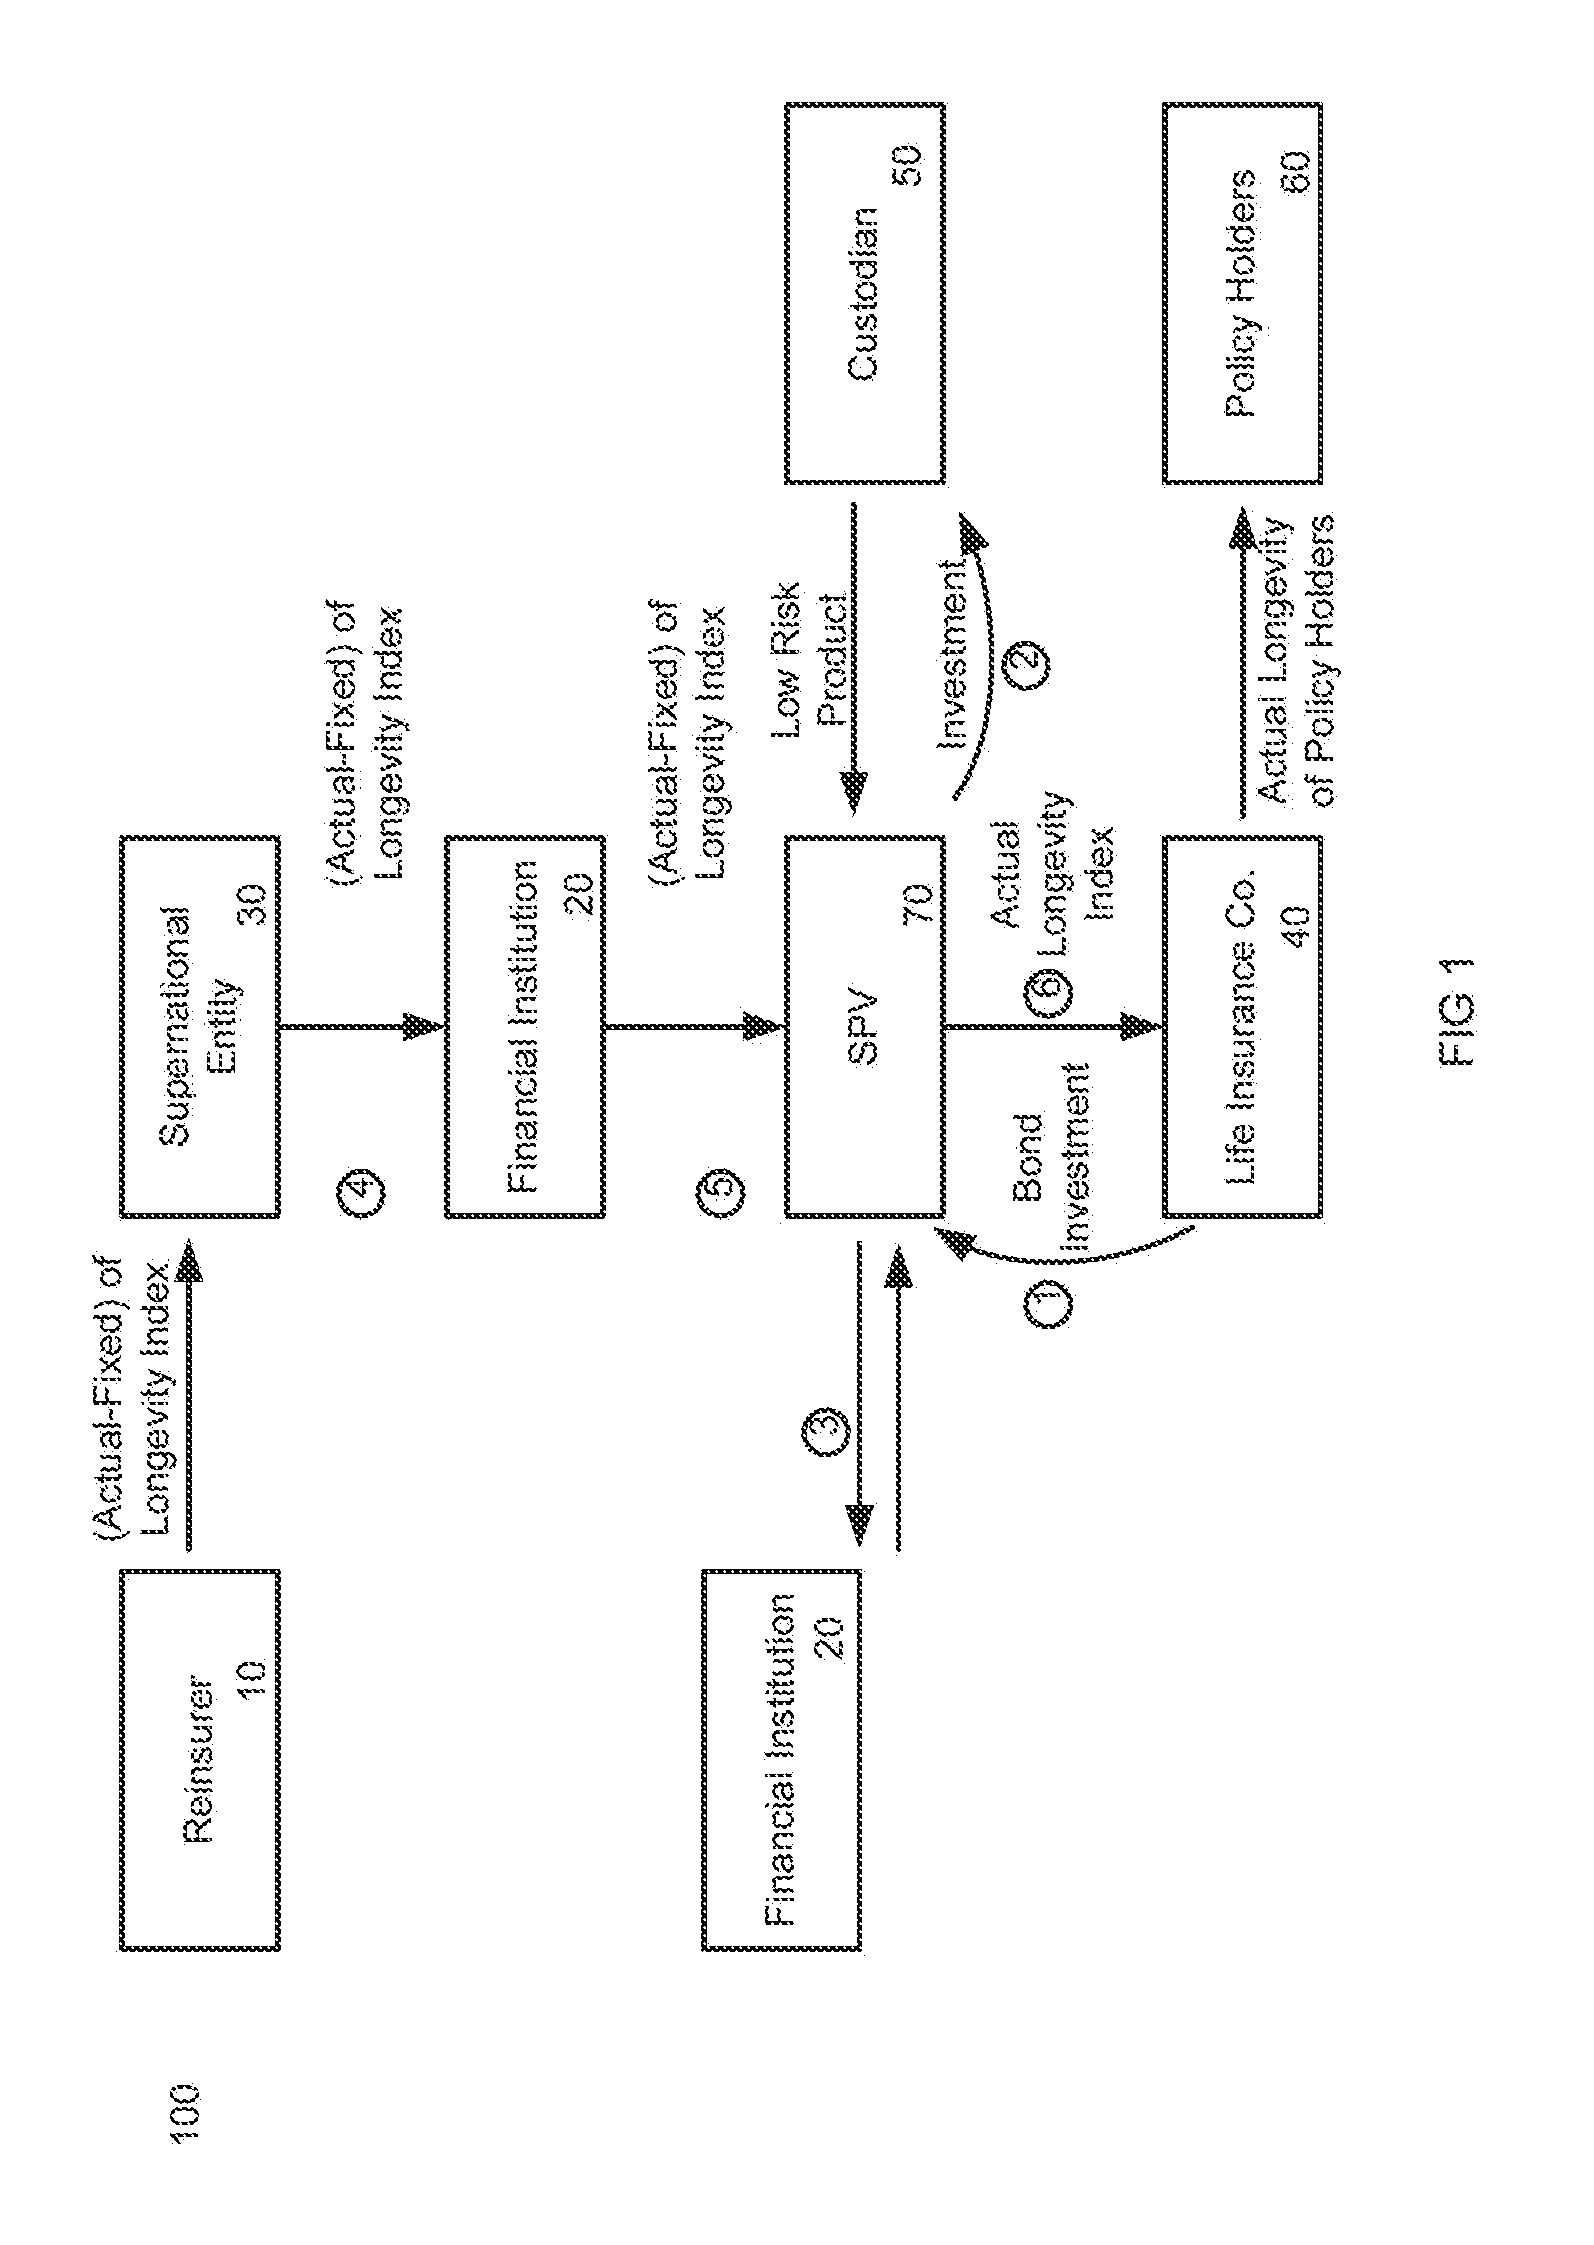 System and method for managing hedging of longevity risk